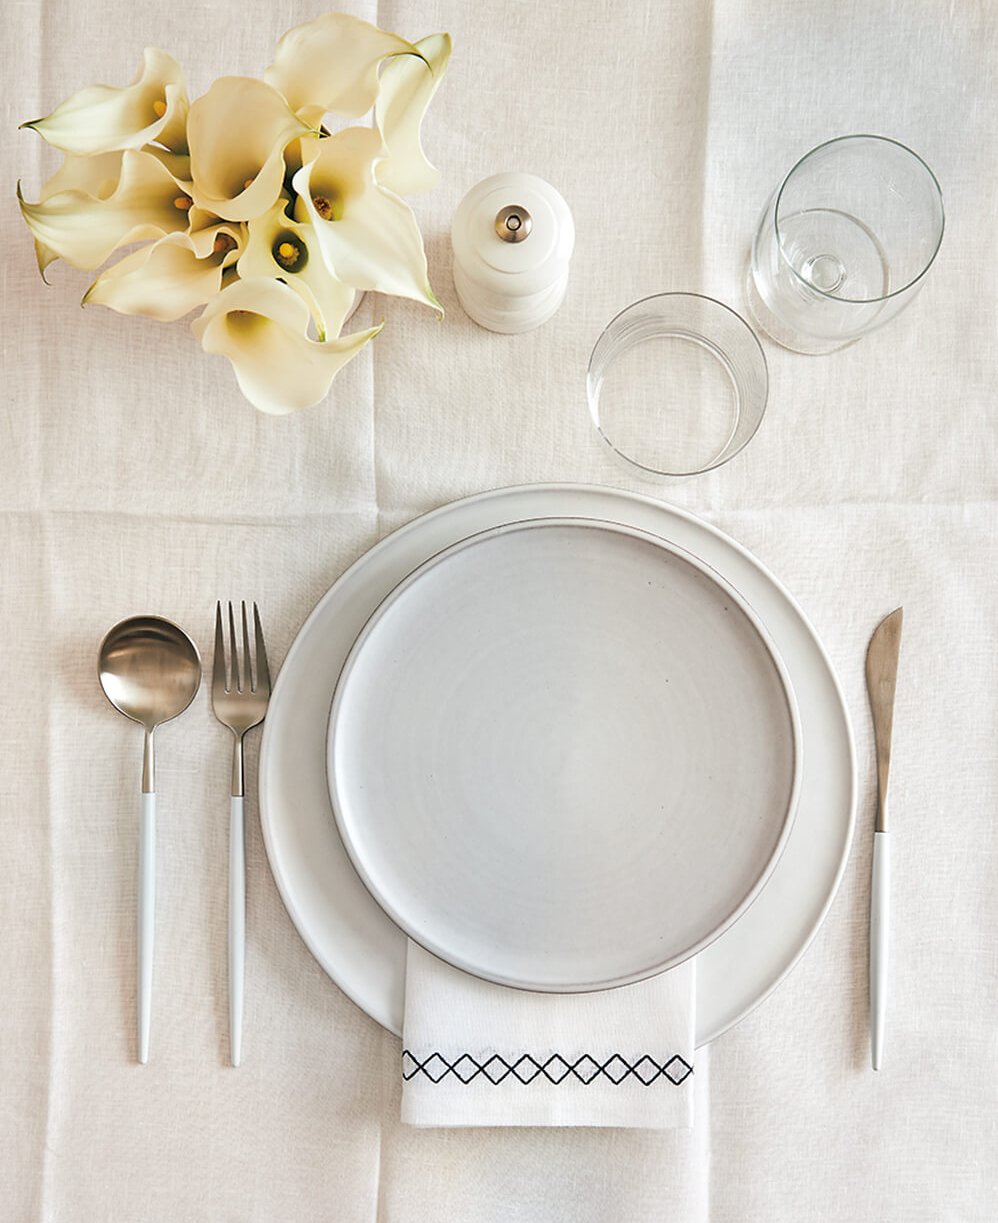 An all-white table setting with flowers.